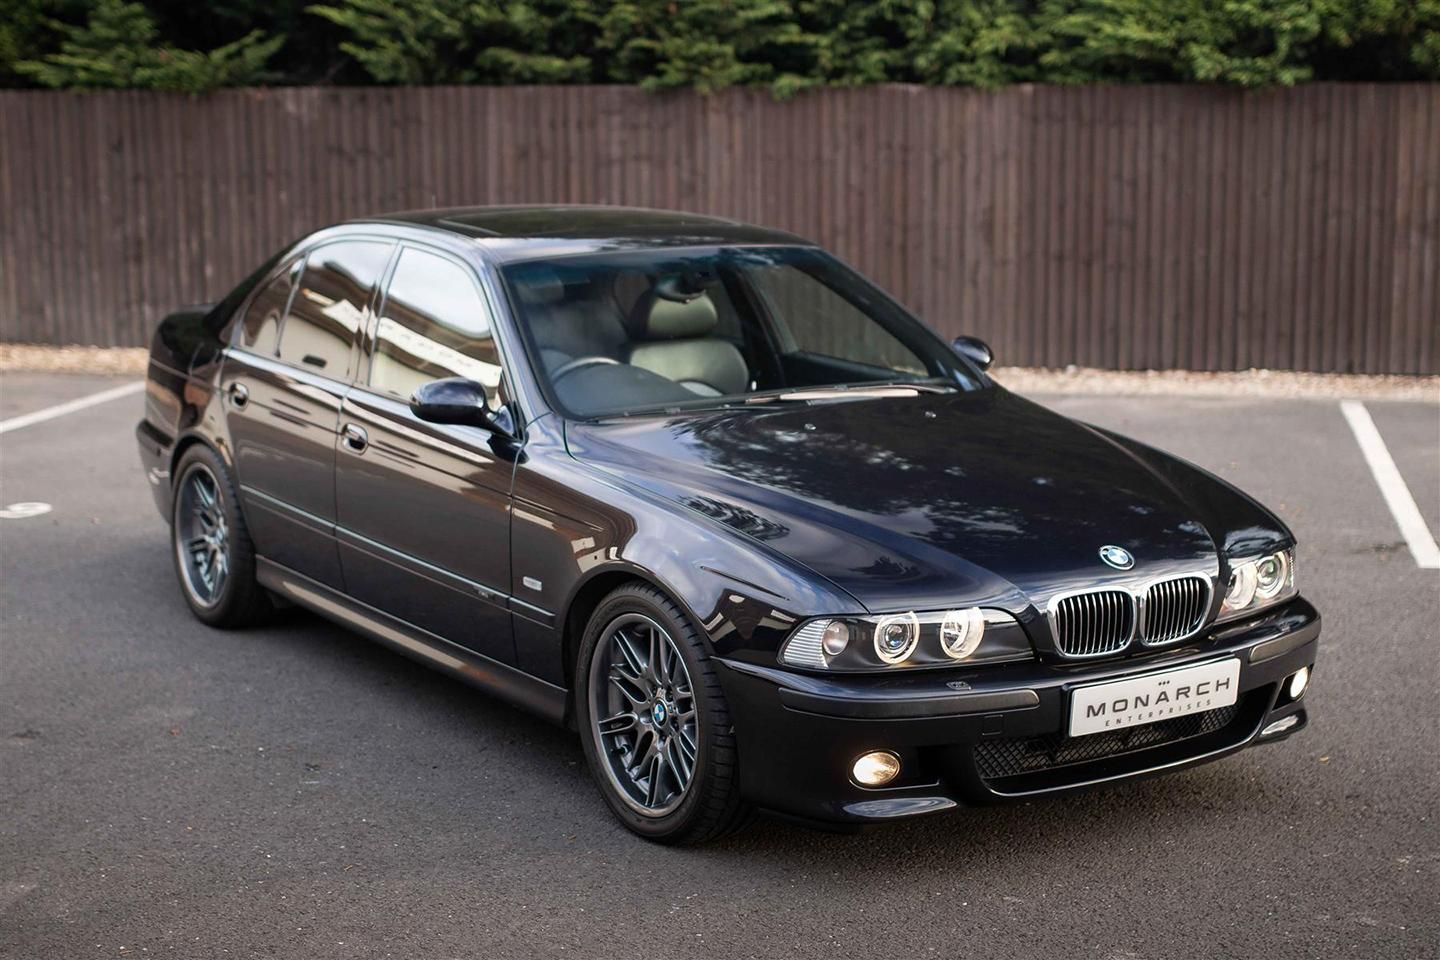 BMW E39 5 Series – The Time Is Now